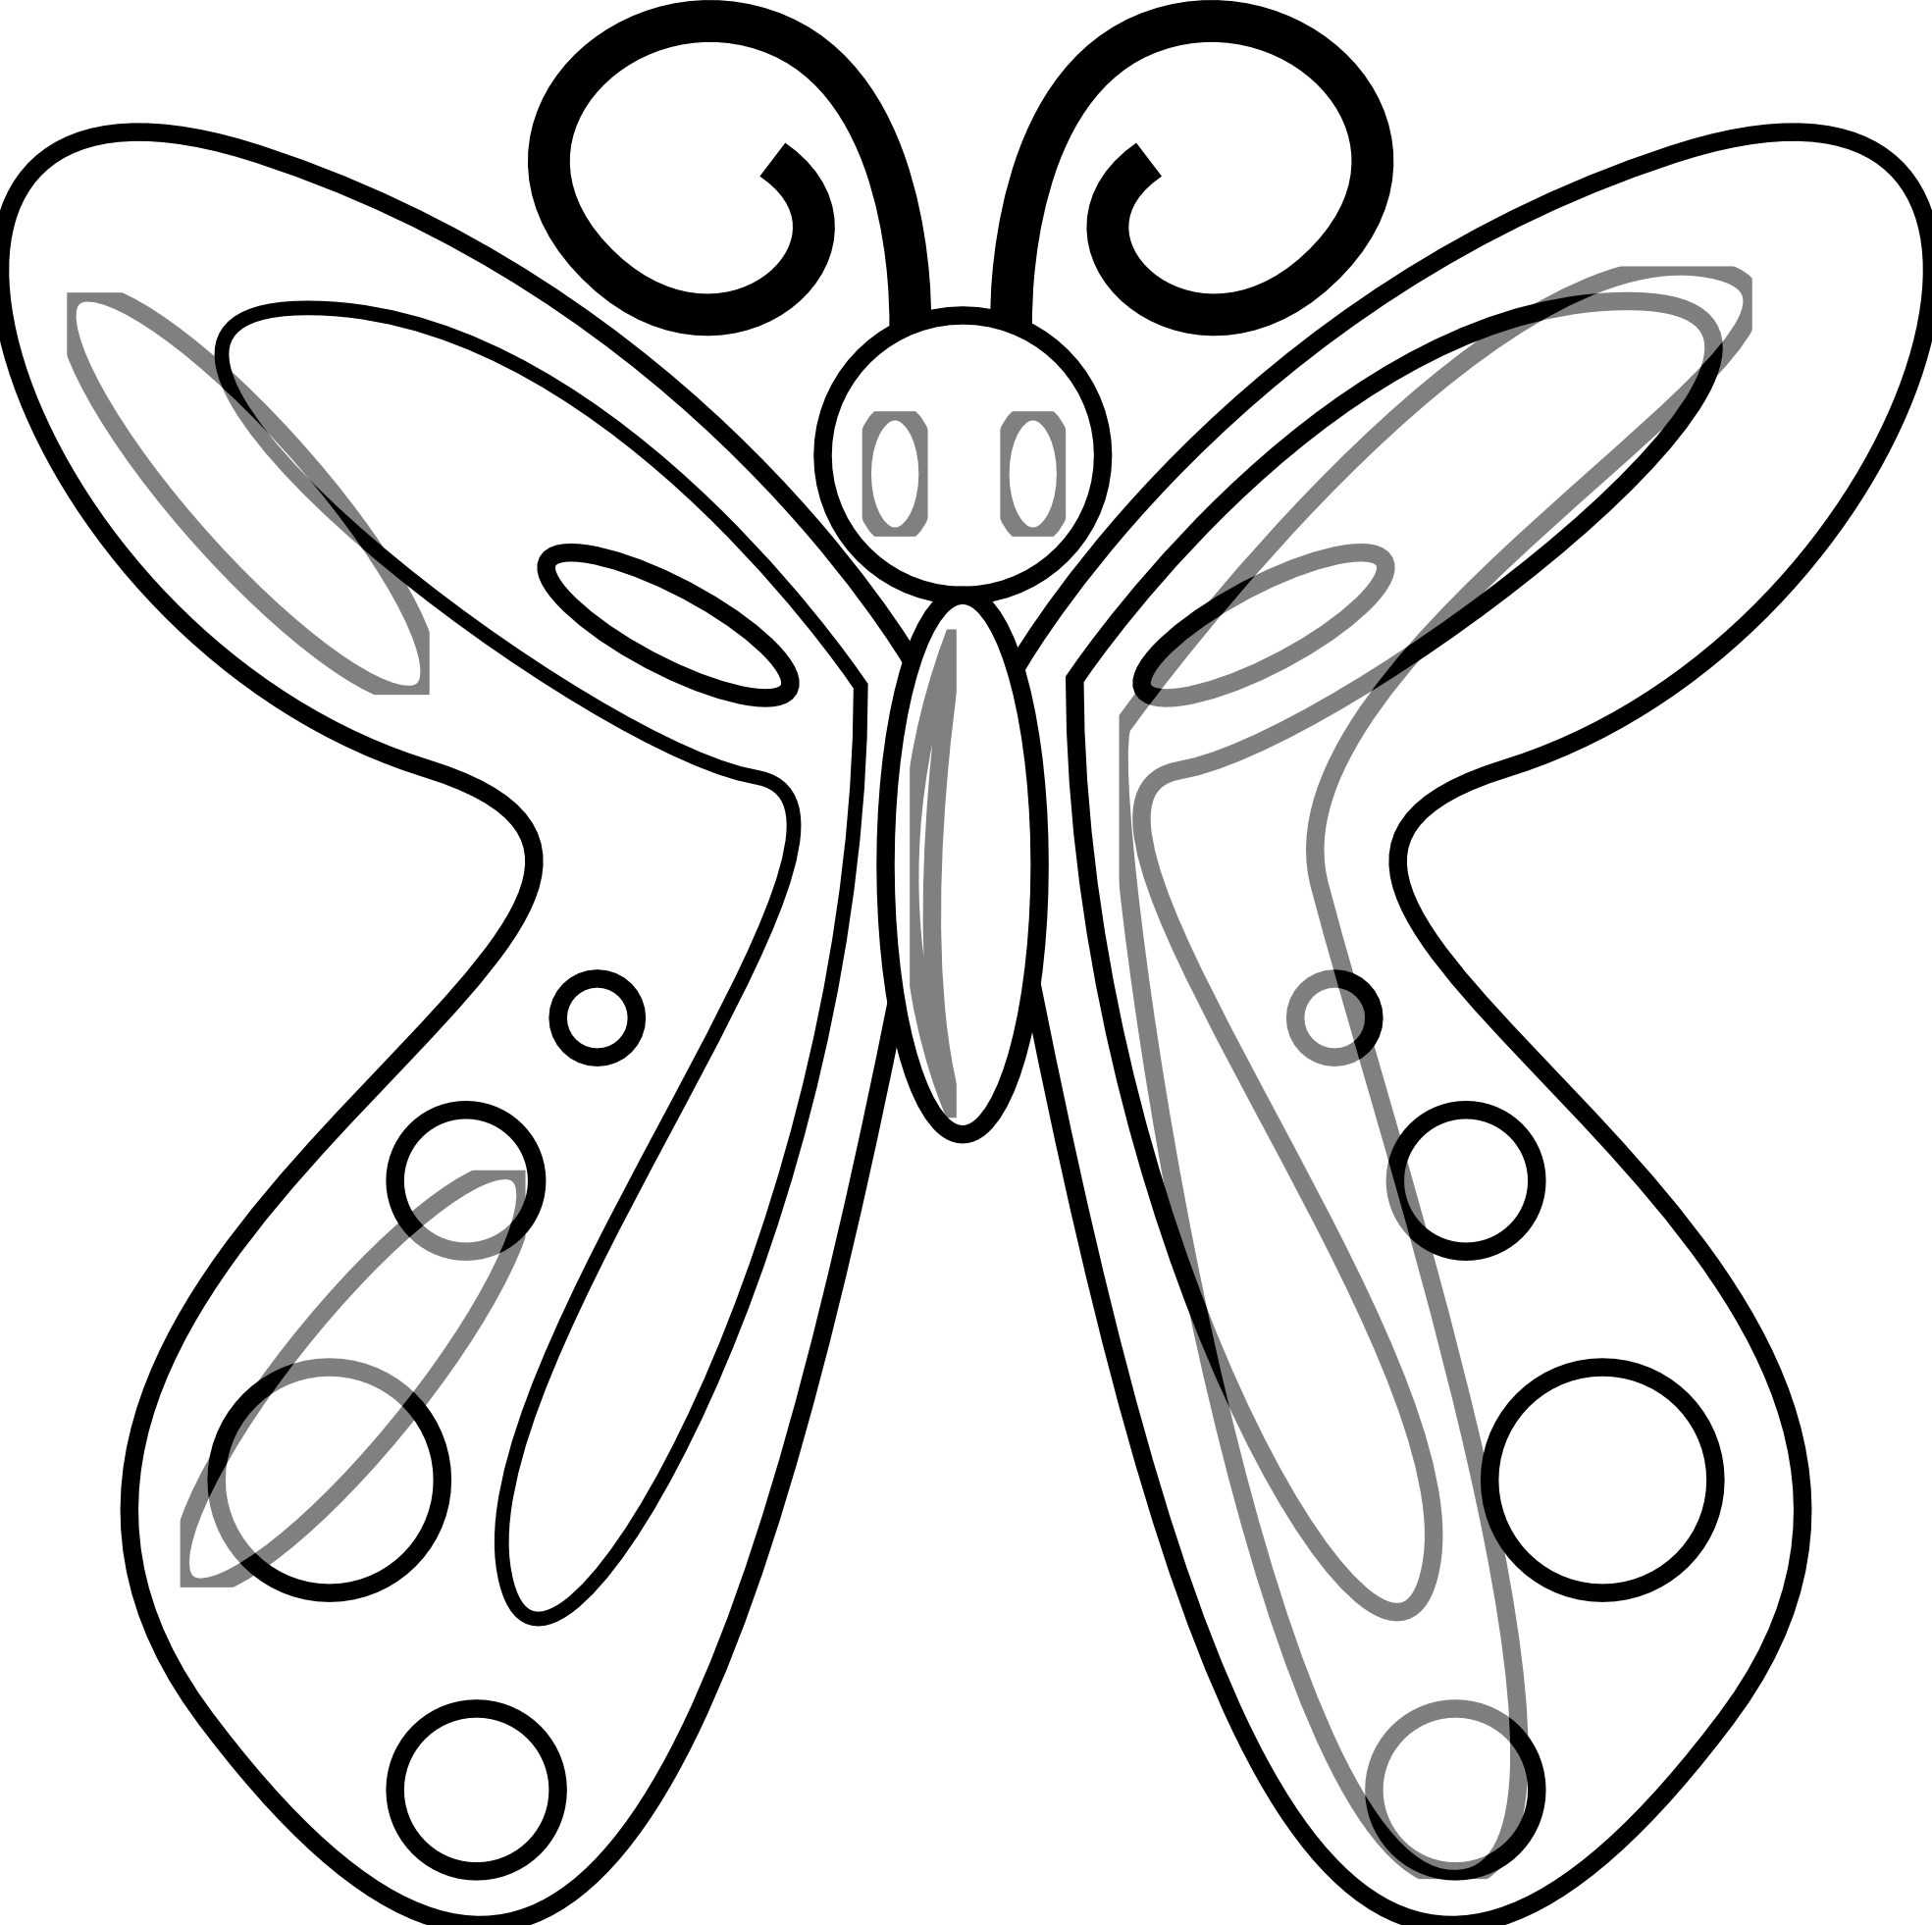 Butterfly Drawings In Black And White - ClipArt Best